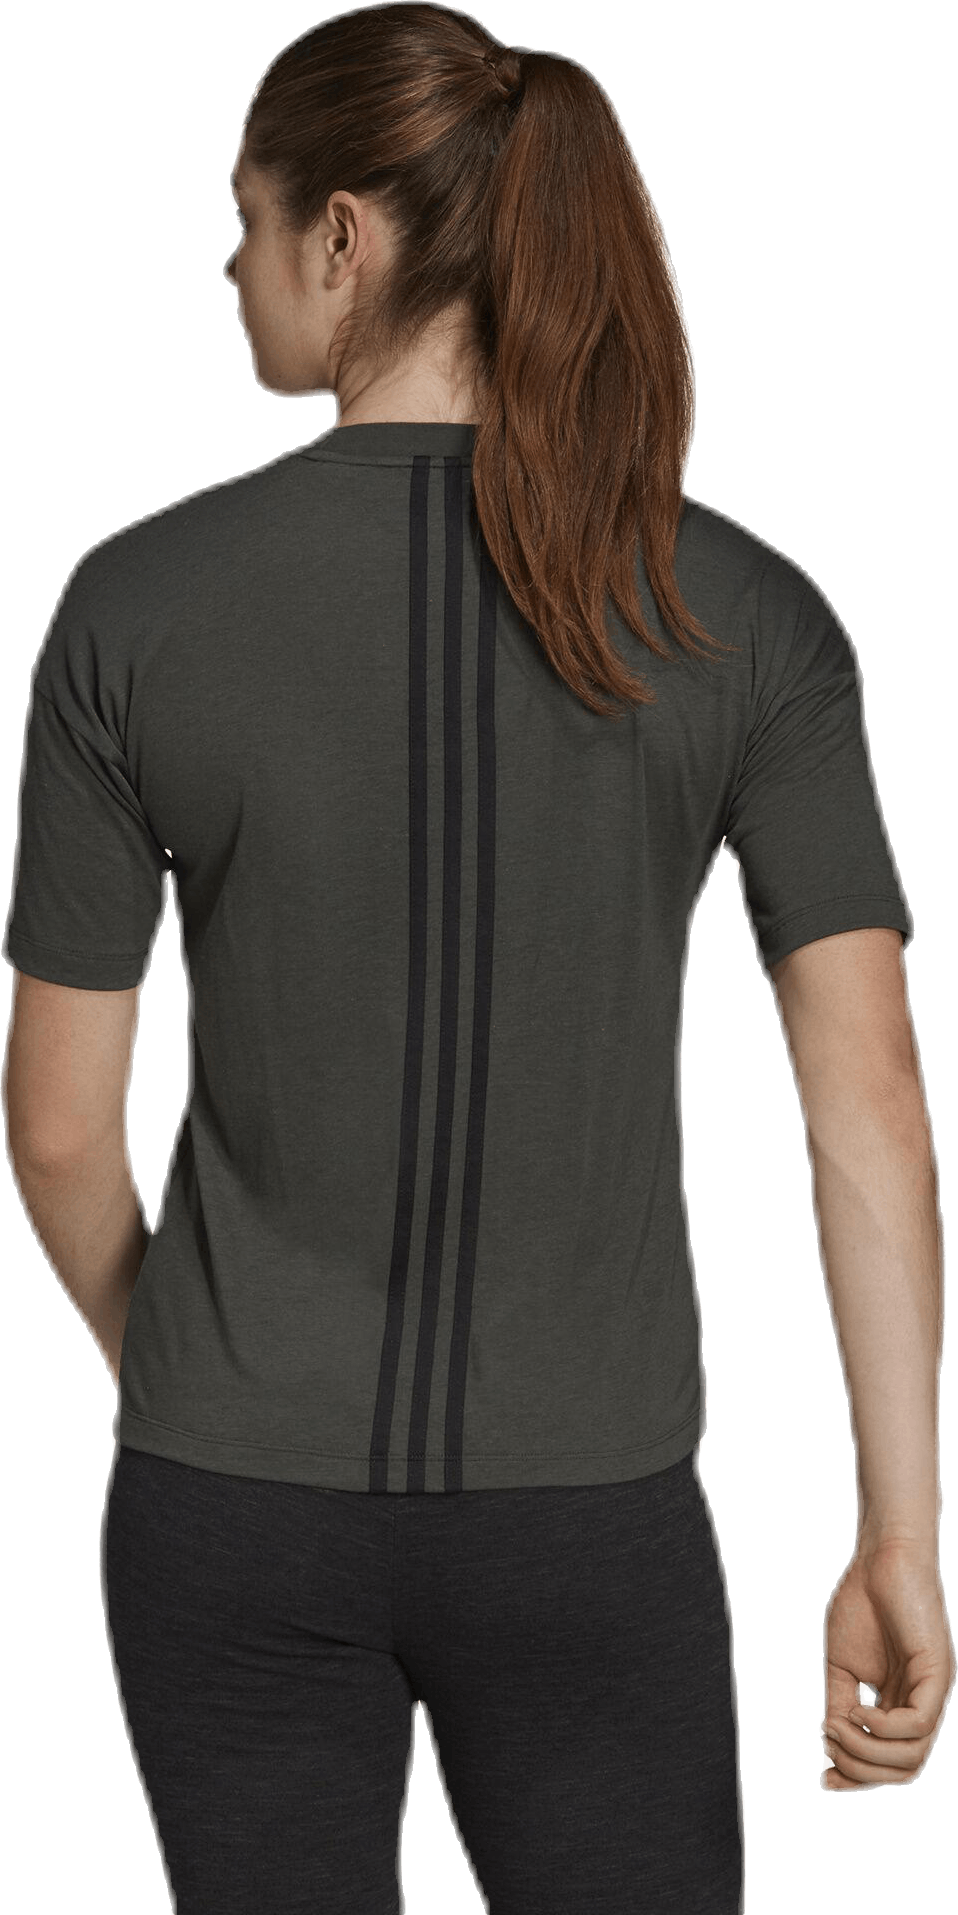 Must Haves 3-Stripes T-Shirt Green